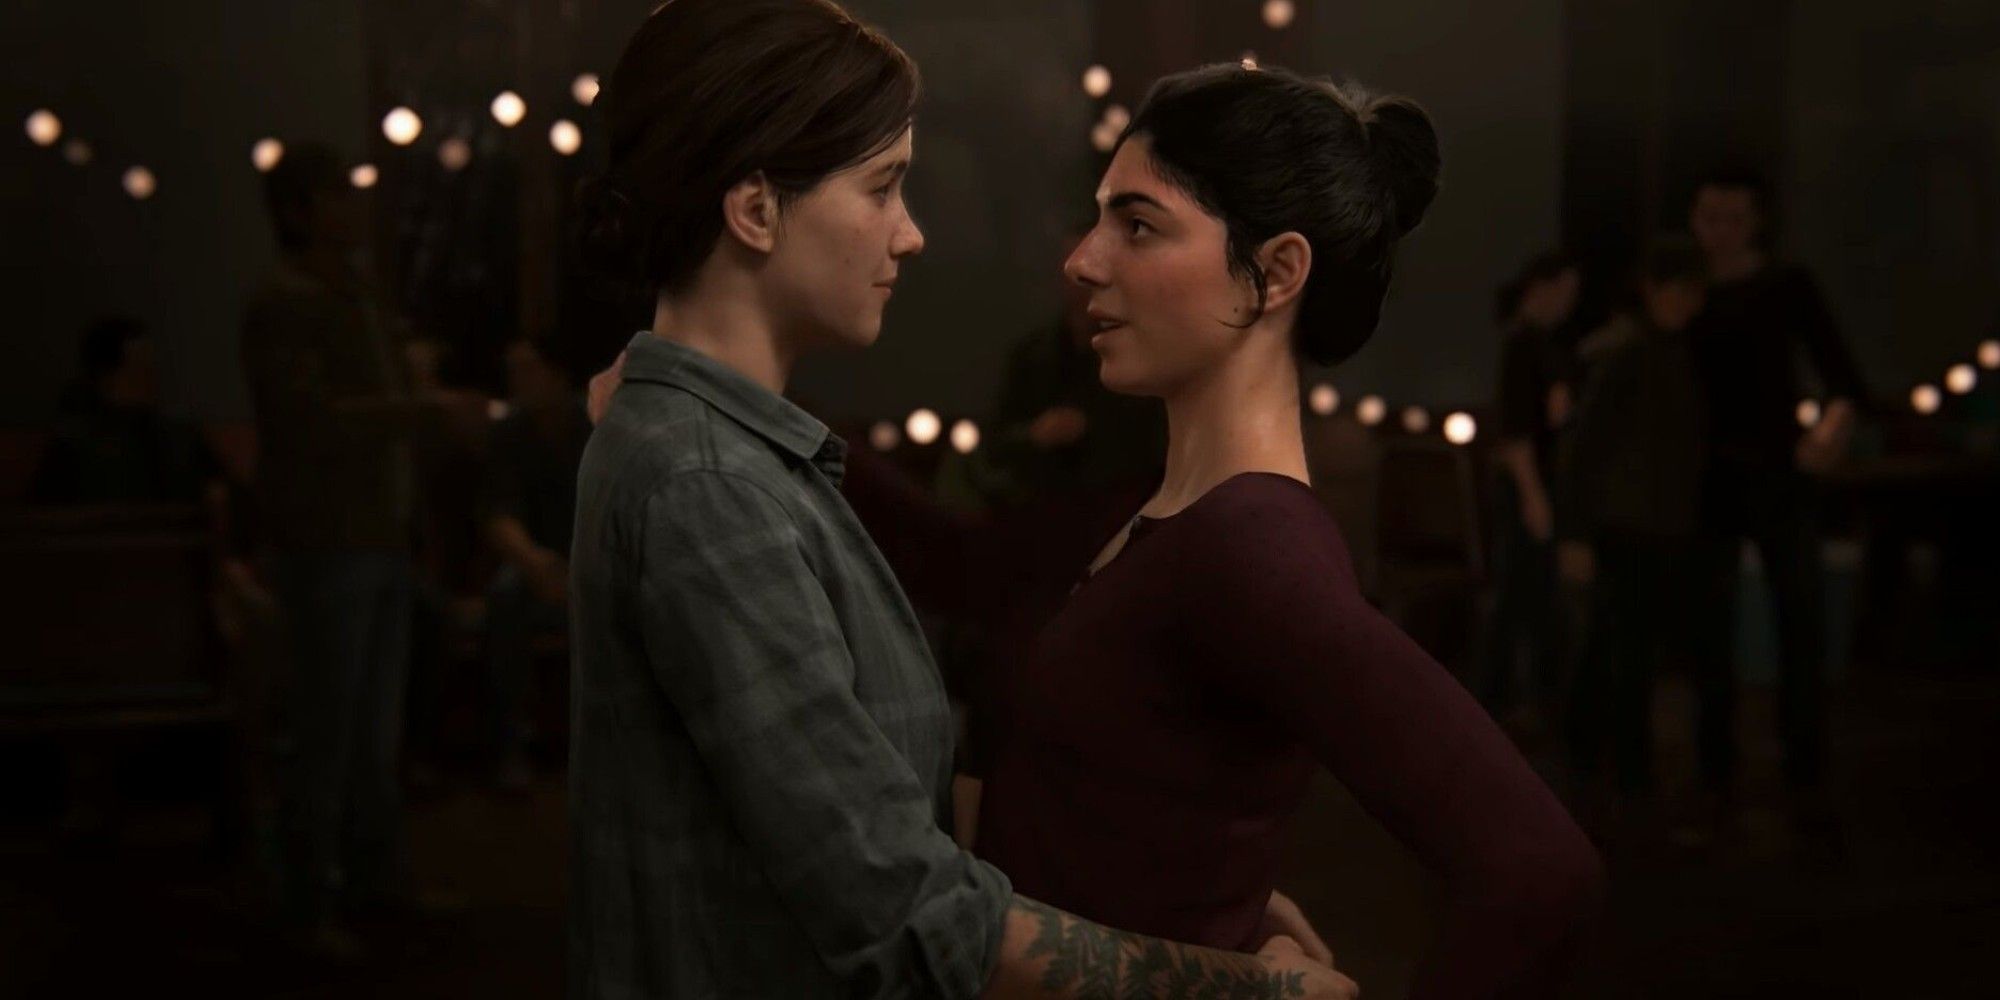 Last of Us 2 Timeline: How Ellie & Abby's Story Match Up